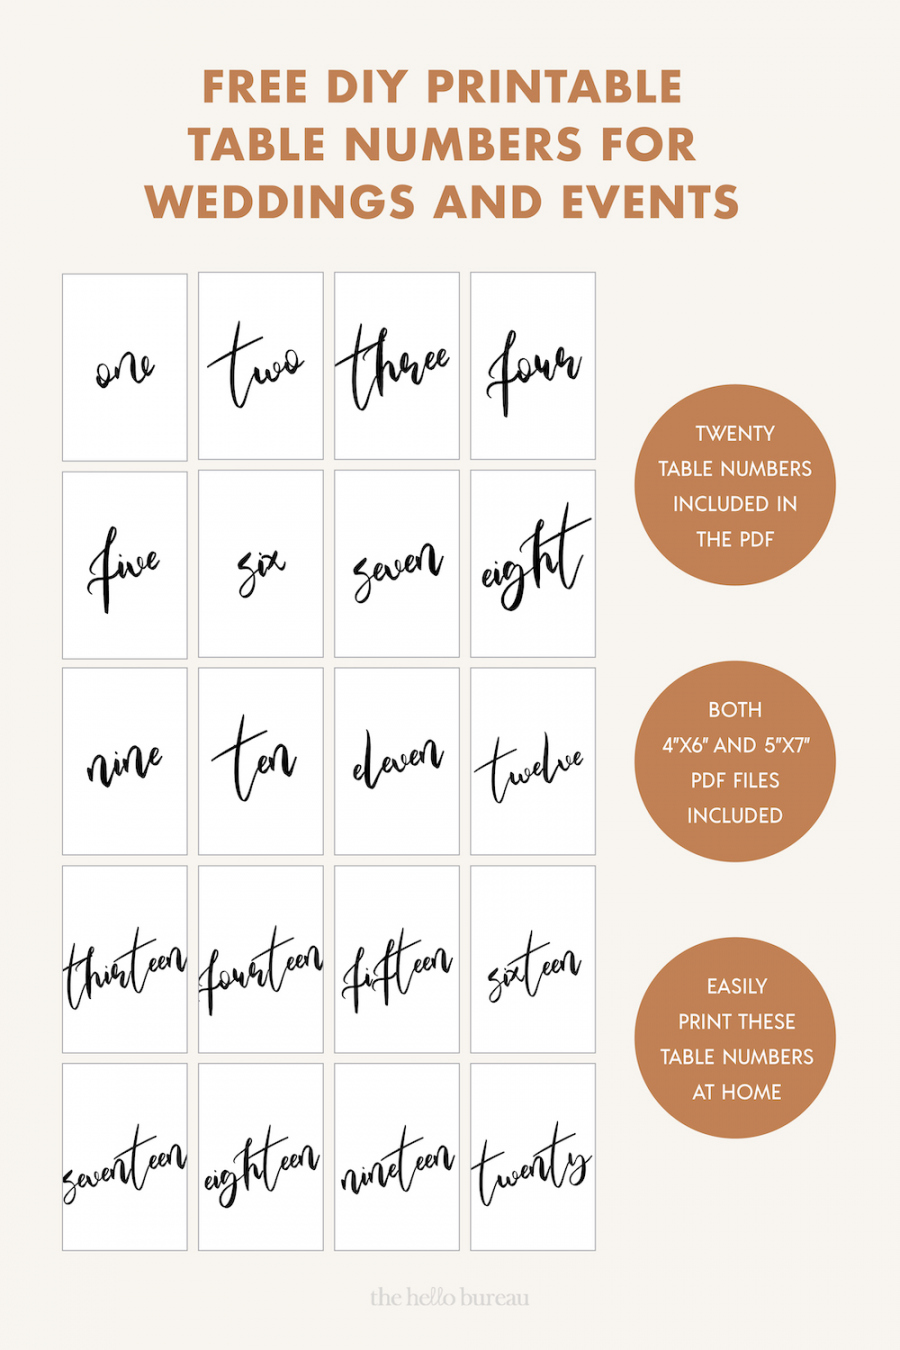 Free Printable Table Numbers For Weddings And Events - FREE Printables - Table Numbers Printable Free